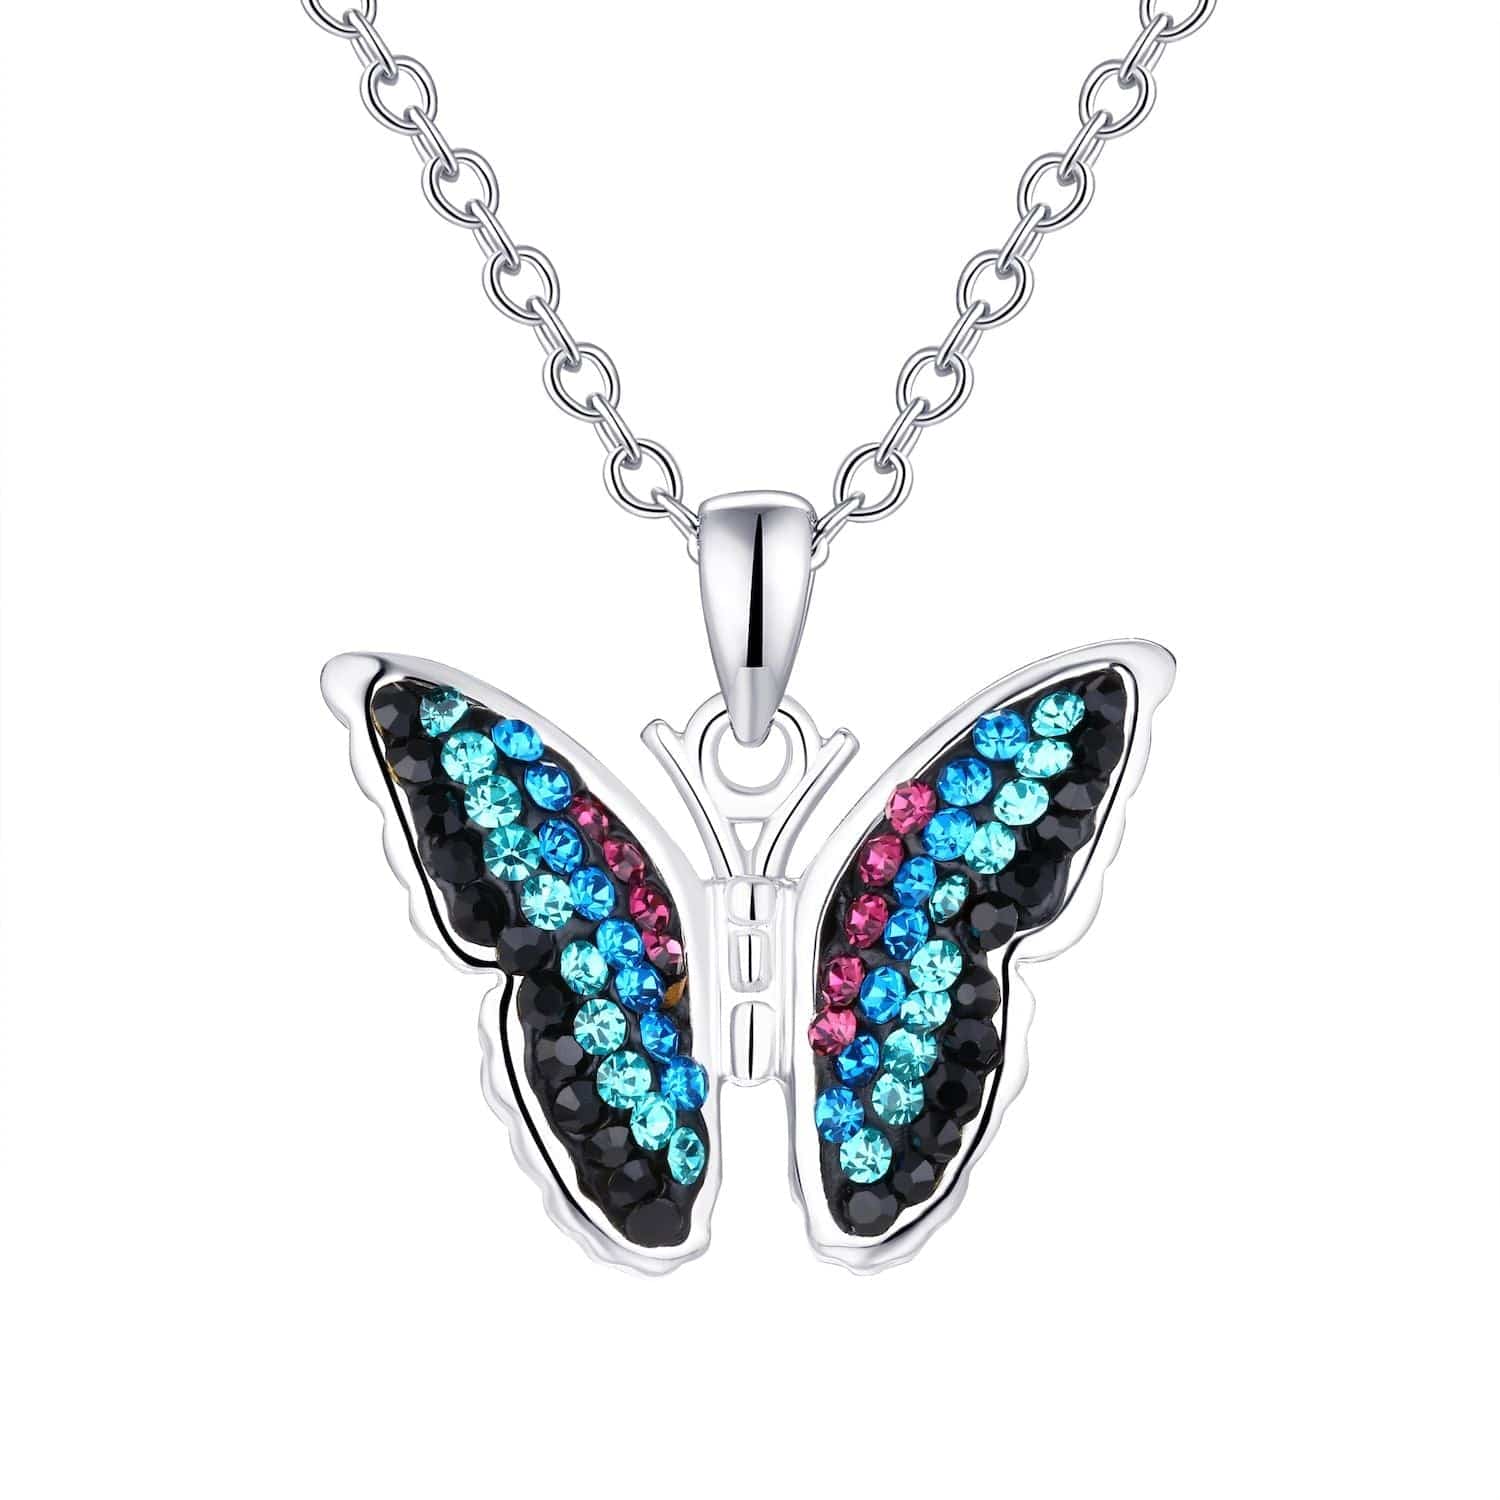 Crystal Collective Crystal Butterfly Pendant Necklace - CLASSY CLOSET BOUTIQUECrystal Collective Crystal Butterfly Pendant Necklacenecklace3571635Silver Tone Blue